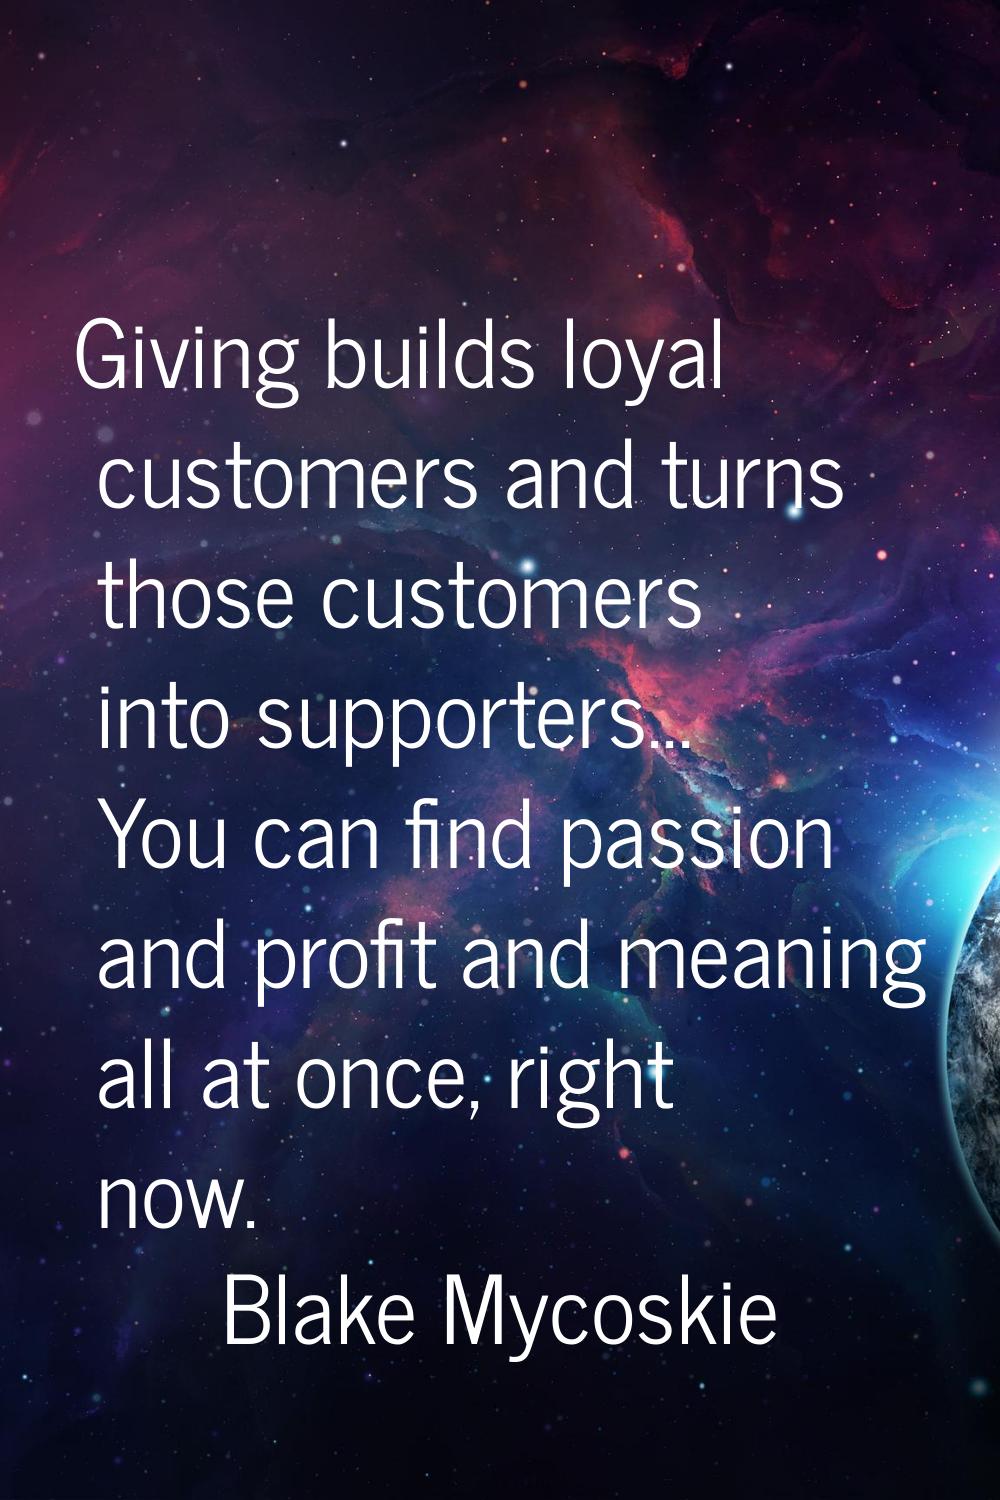 Giving builds loyal customers and turns those customers into supporters... You can find passion and